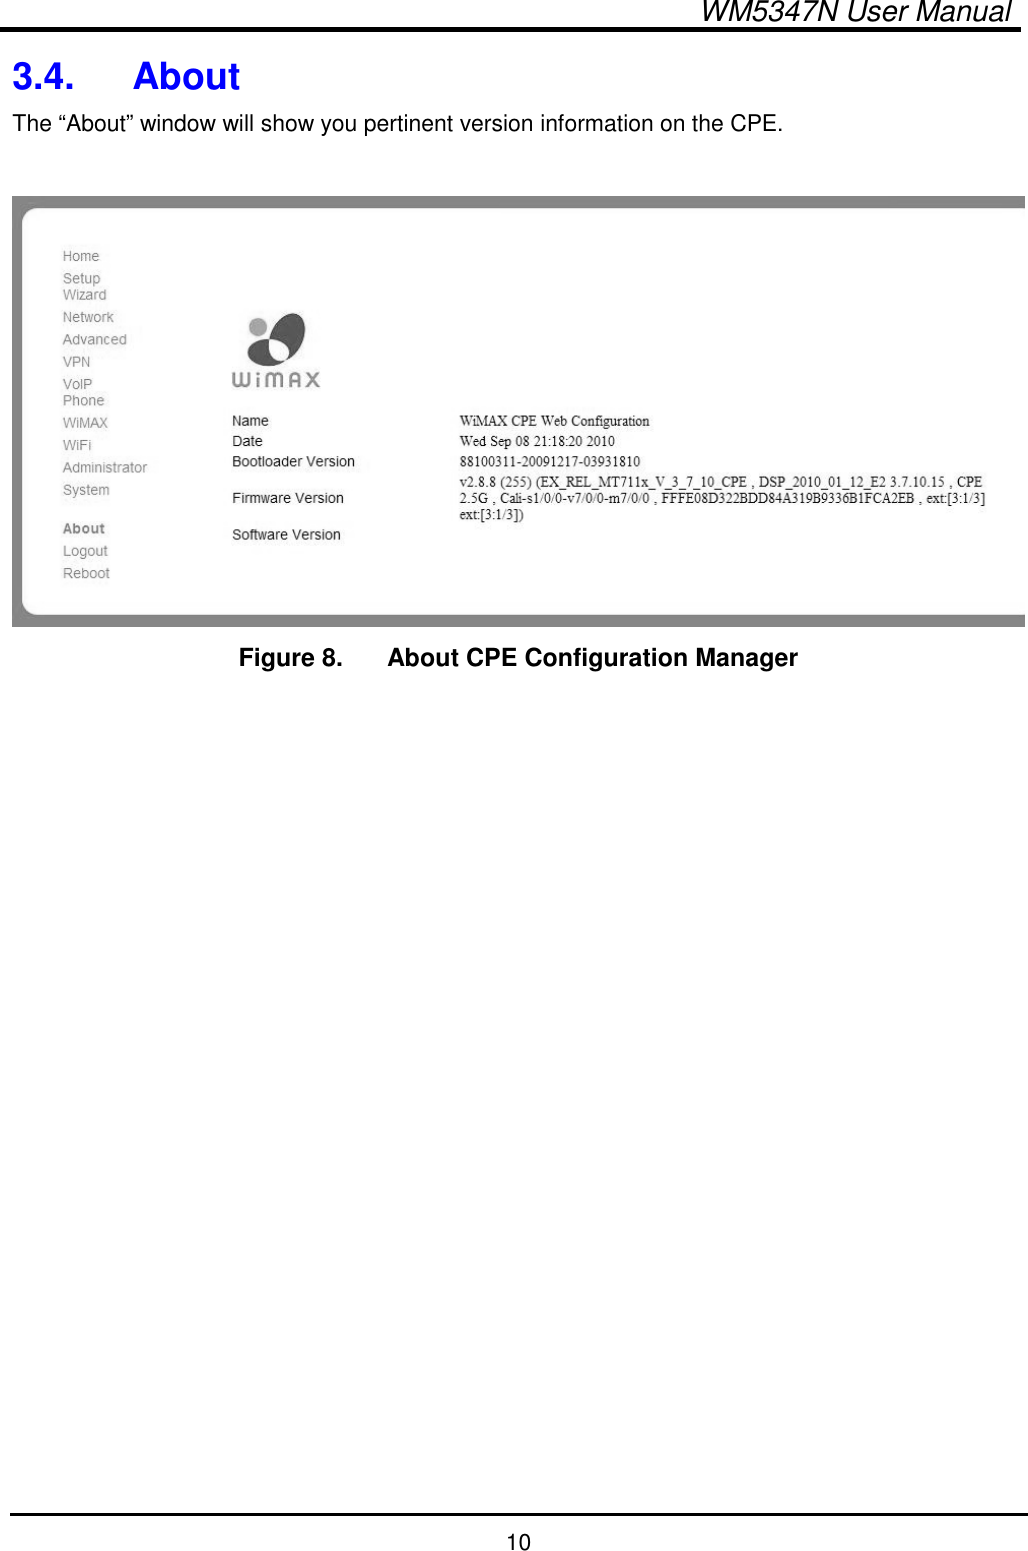  WM5347N User Manual  10 3.4.  About The “About” window will show you pertinent version information on the CPE.   Figure 8.   About CPE Configuration Manager   